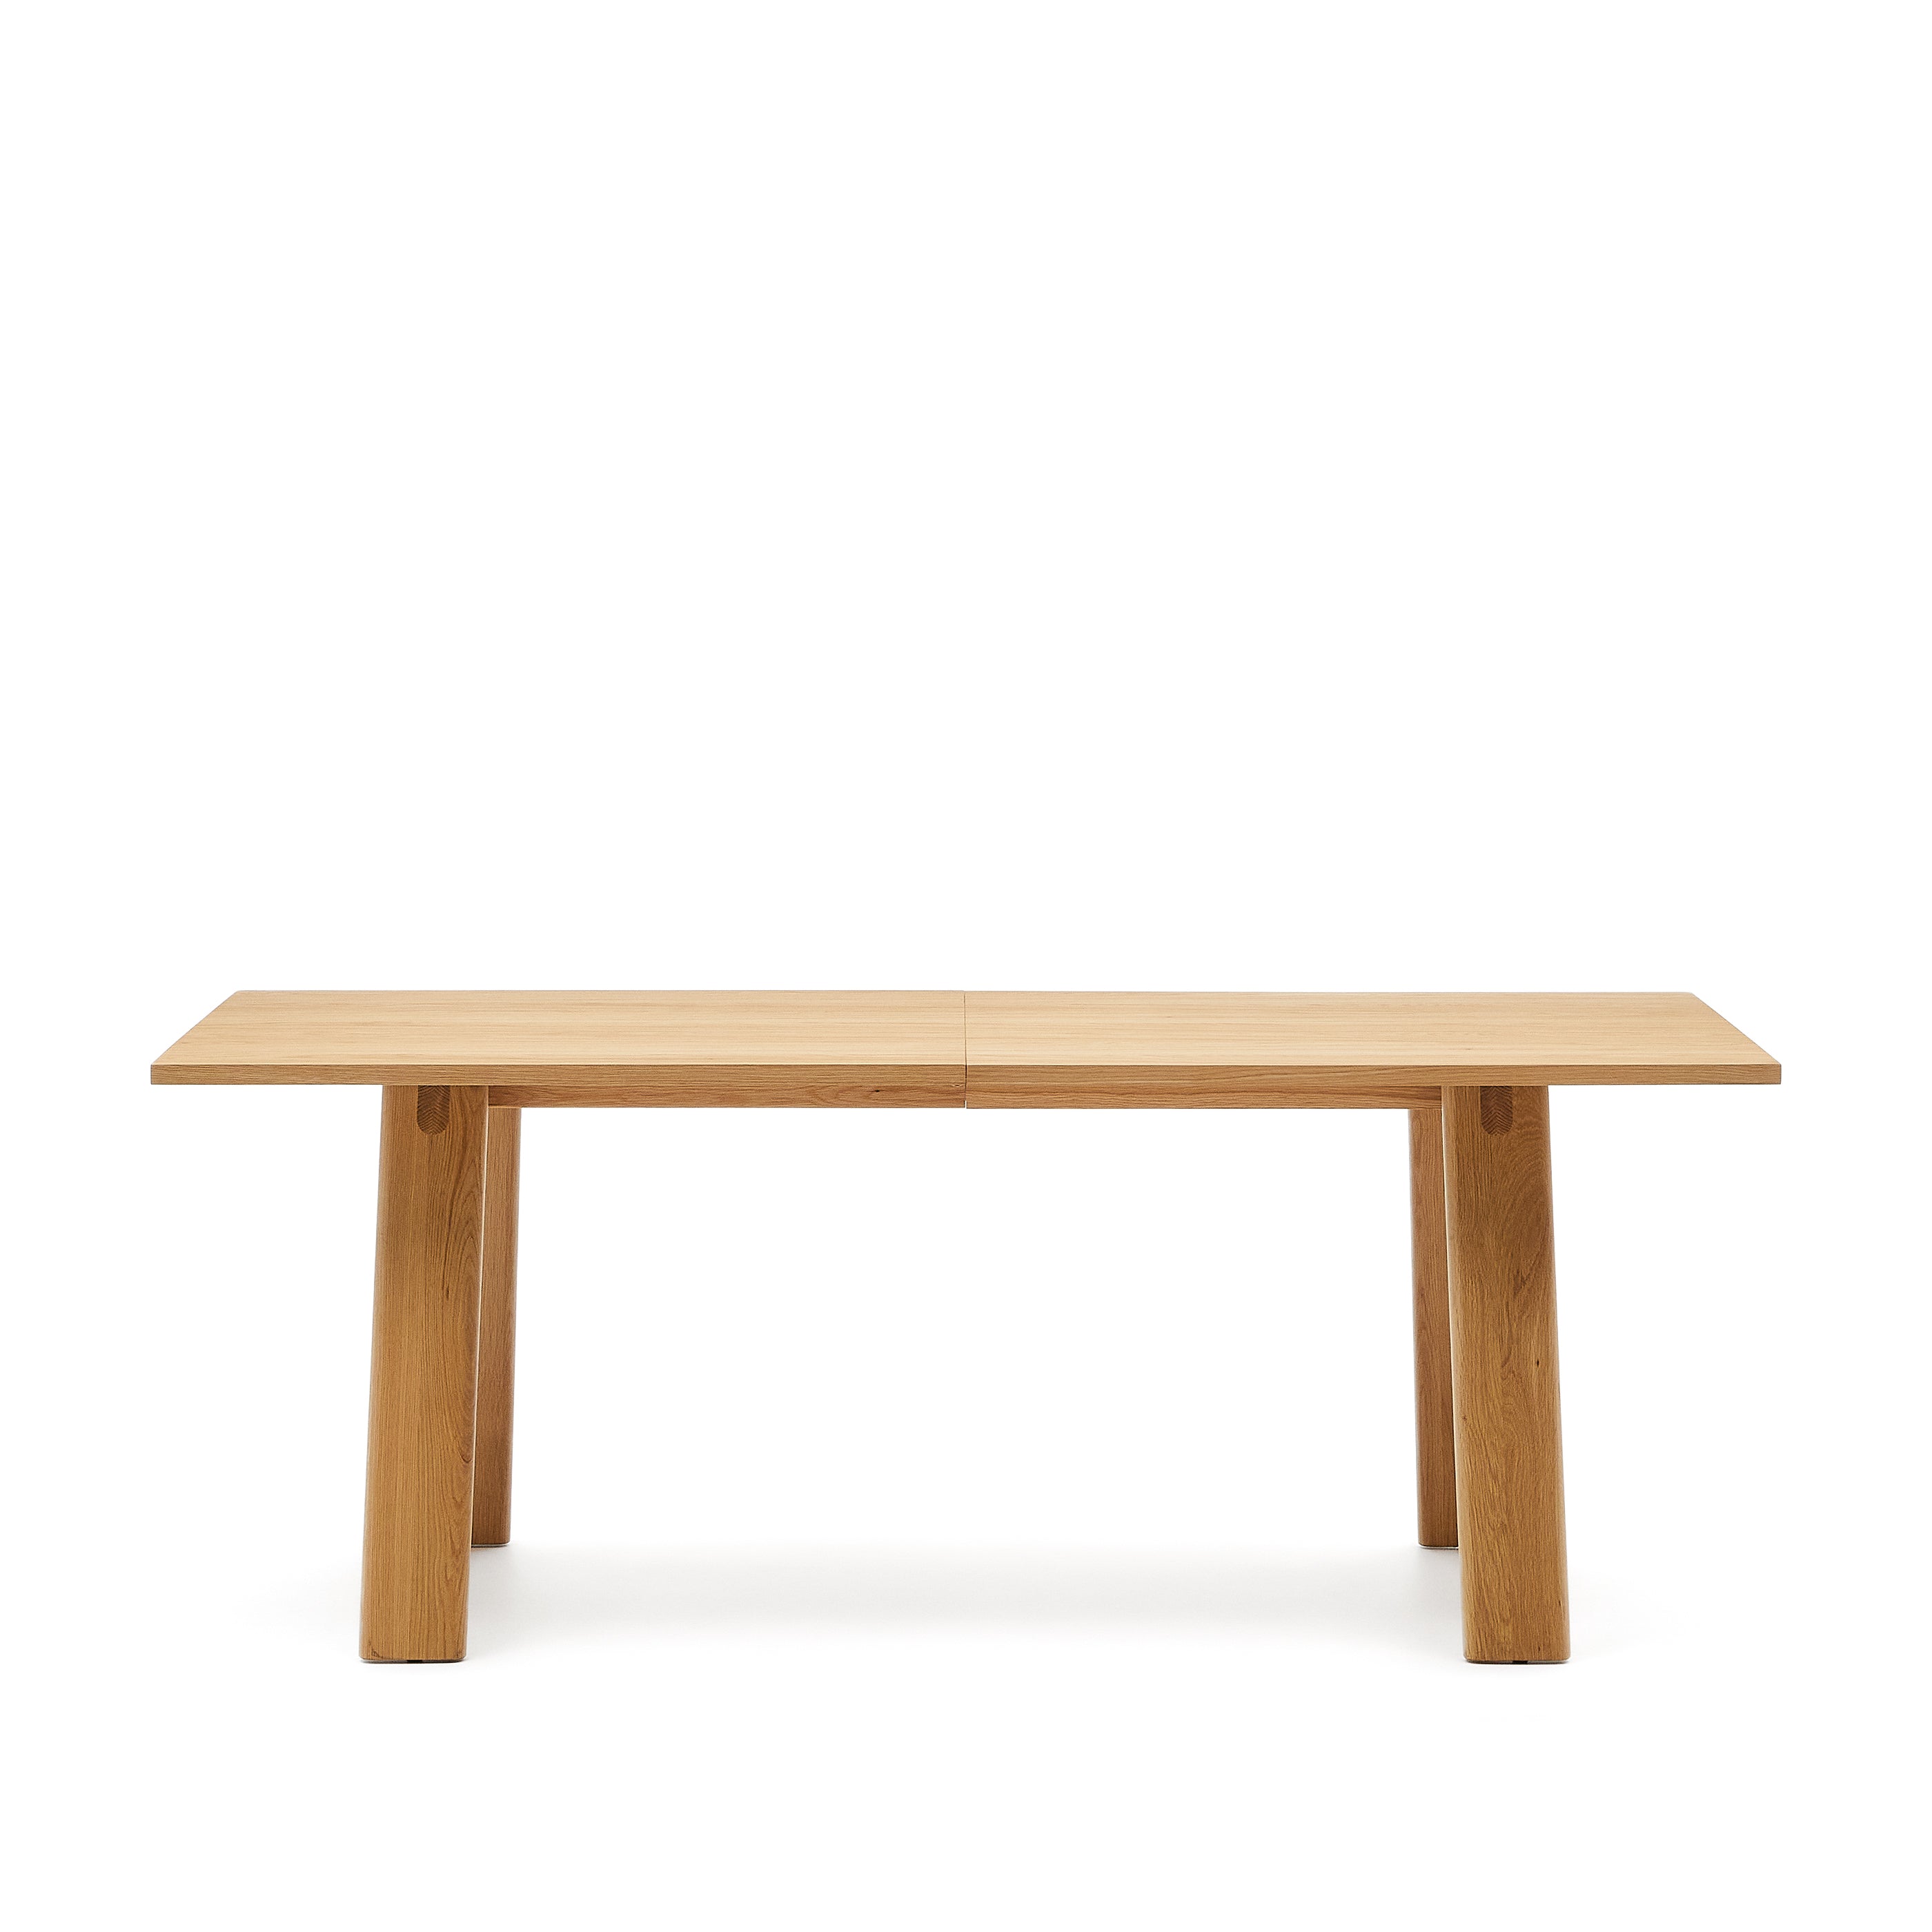 Arlen extendable table in solid oak and veneer with natural finish 200(250)x95cm FSC Mix Credit